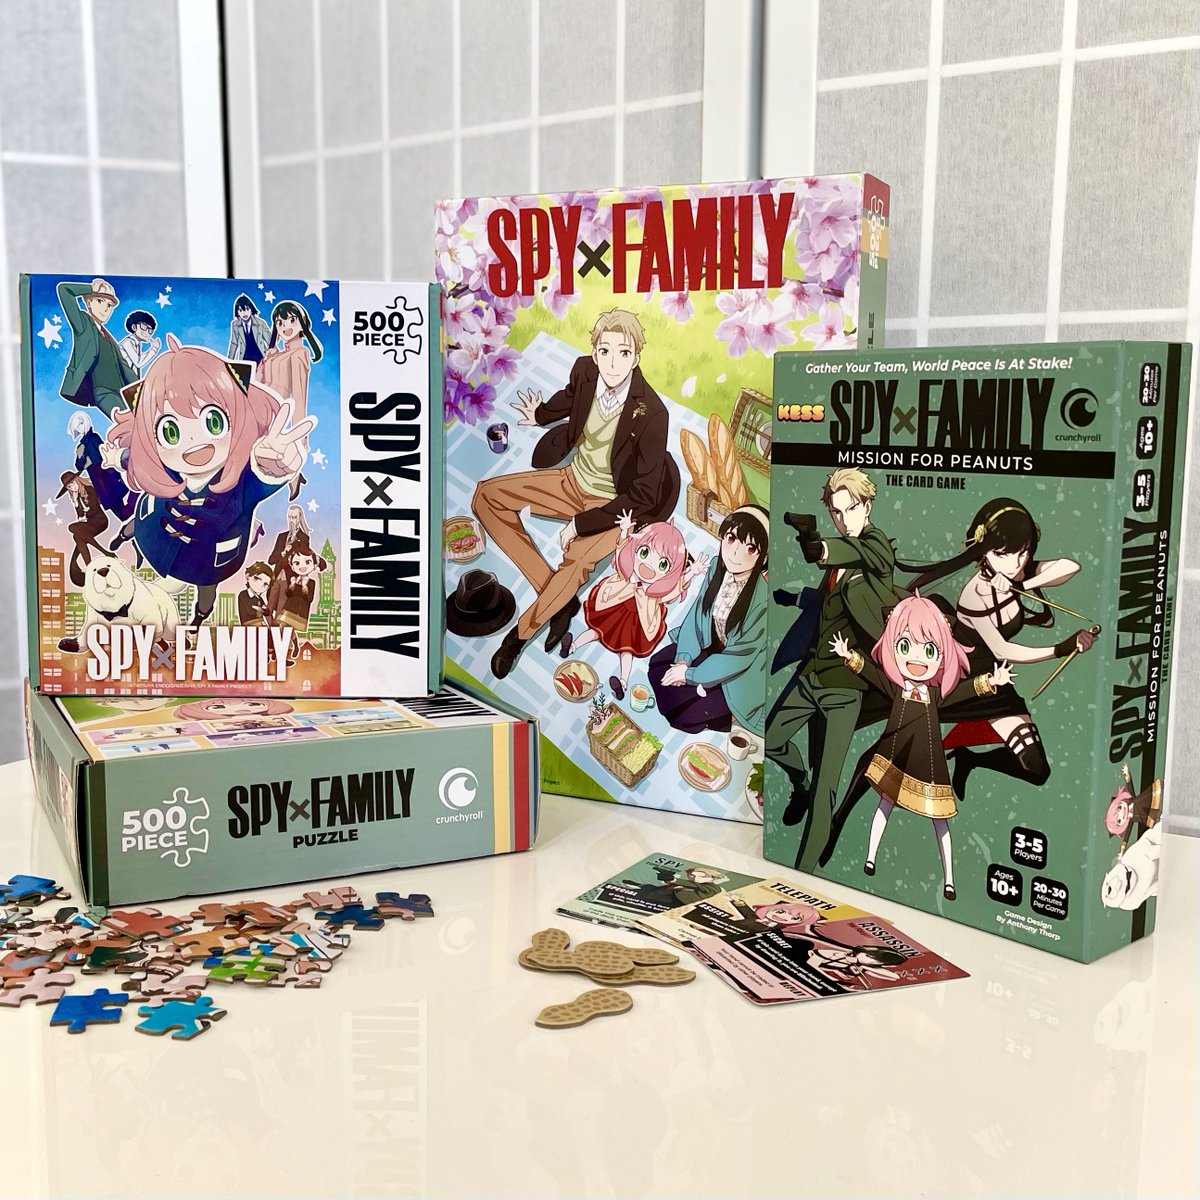 Who’s up for a family game night with the Forgers?🧩🎲🕵🏻‍♀️

#FamilyGameNight #Spyxfamily #puzzles #missionforpeanuts #animefans #kessentertainment #kessent #familygamenight #familyespionage #spyxfamilygames #spyxfamilyadventure